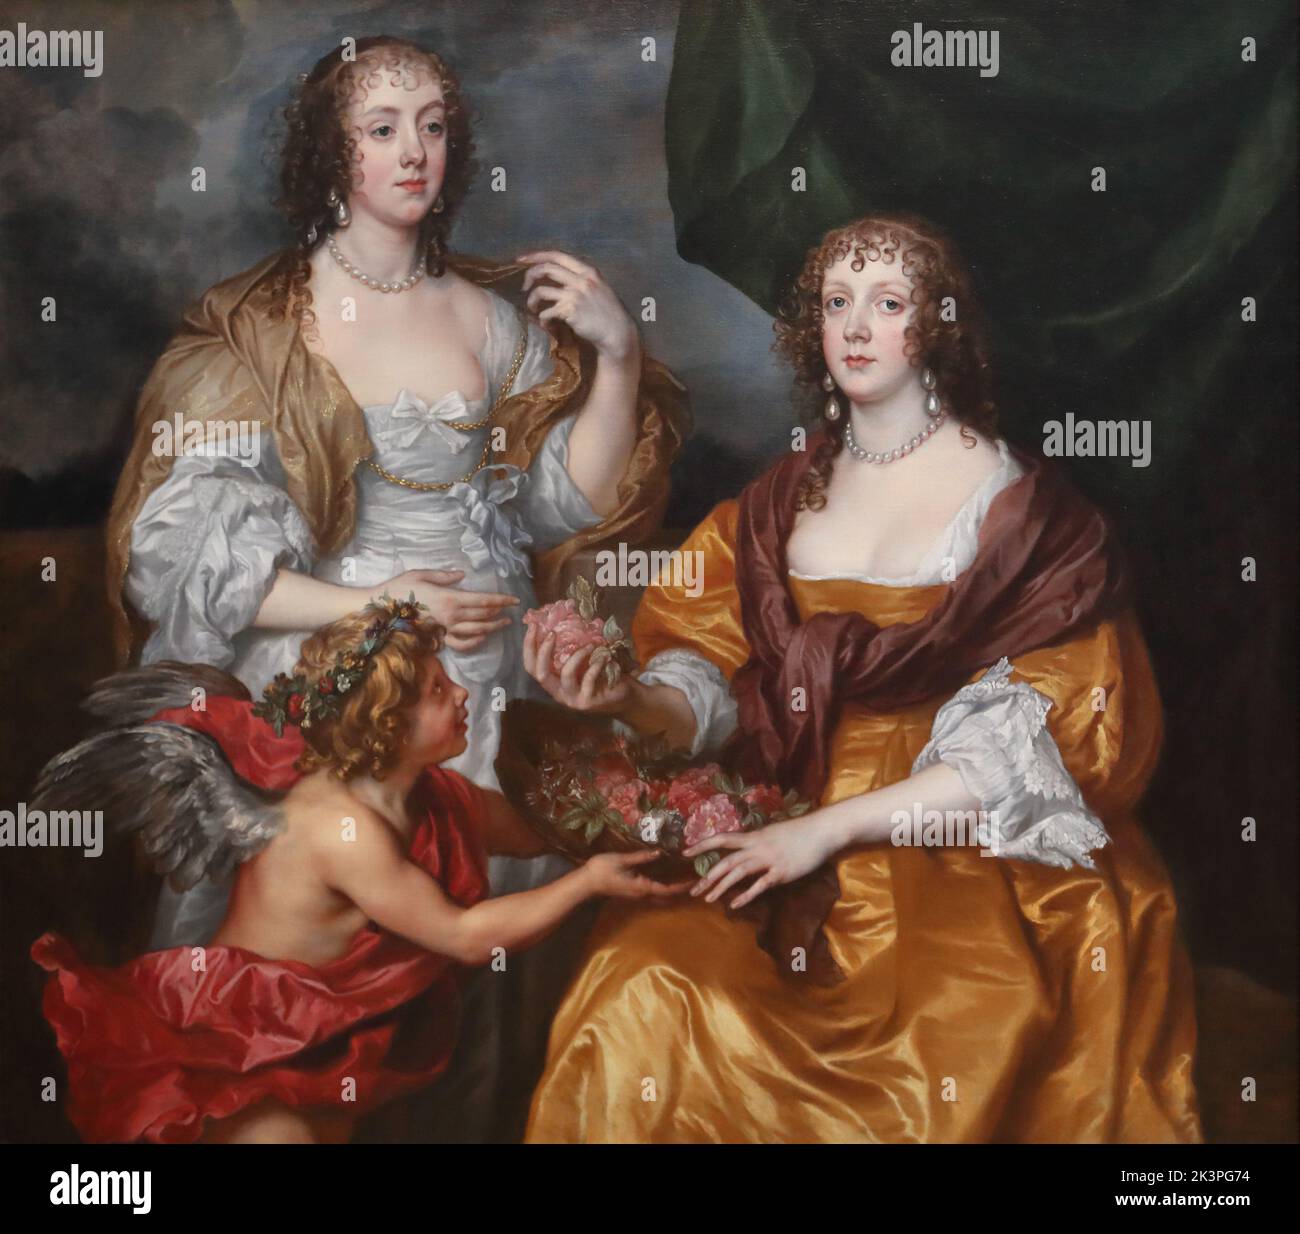 Lady Elizabeth Thimbelby and her Sister by Anthony van Dyck at the National Gallery, London, UK Stock Photo